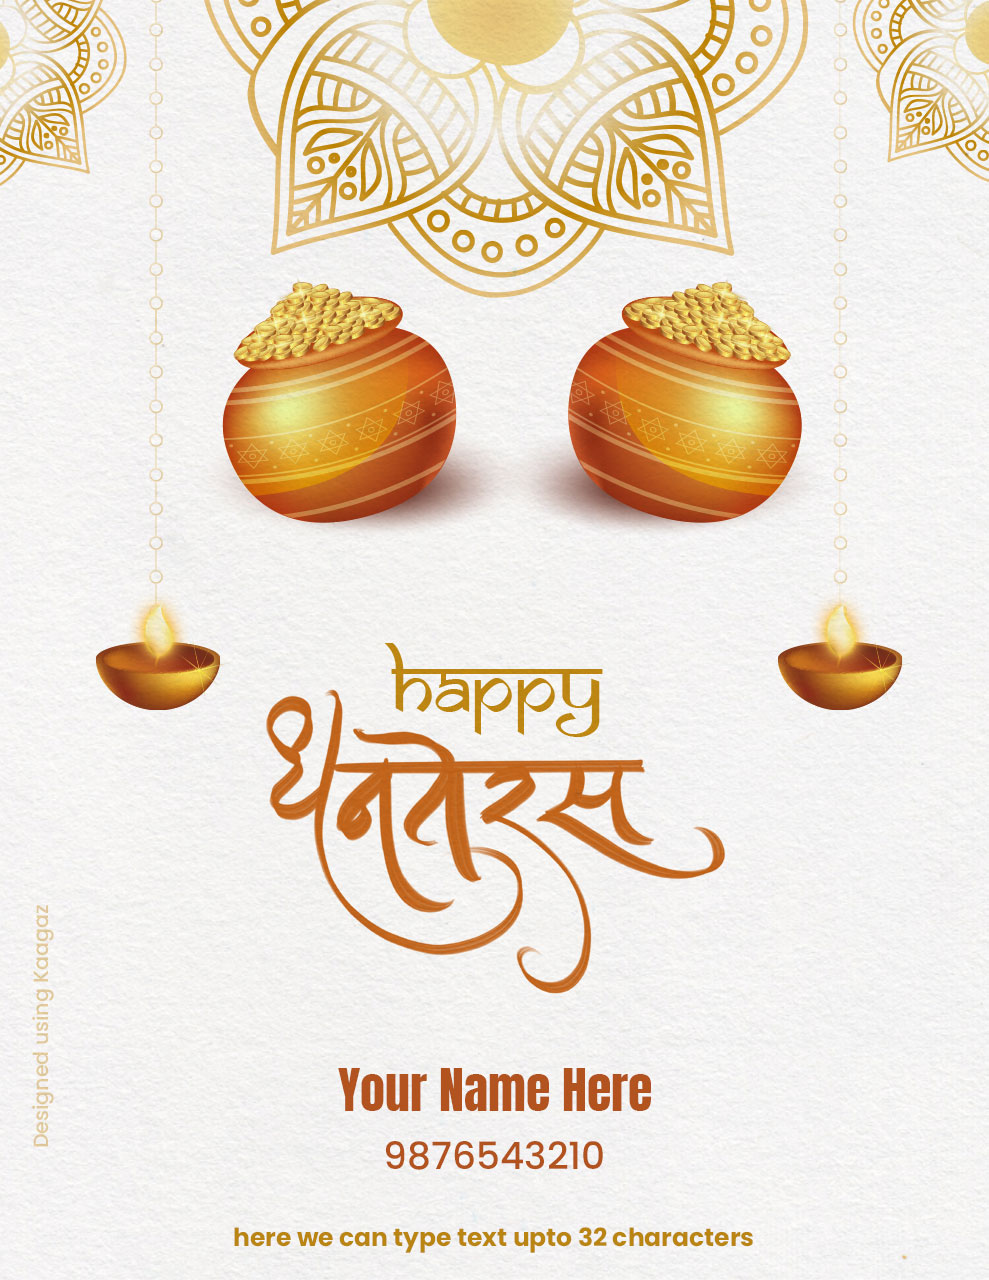 May this Dhanteras bring happiness, wealth & prosperity to your family!